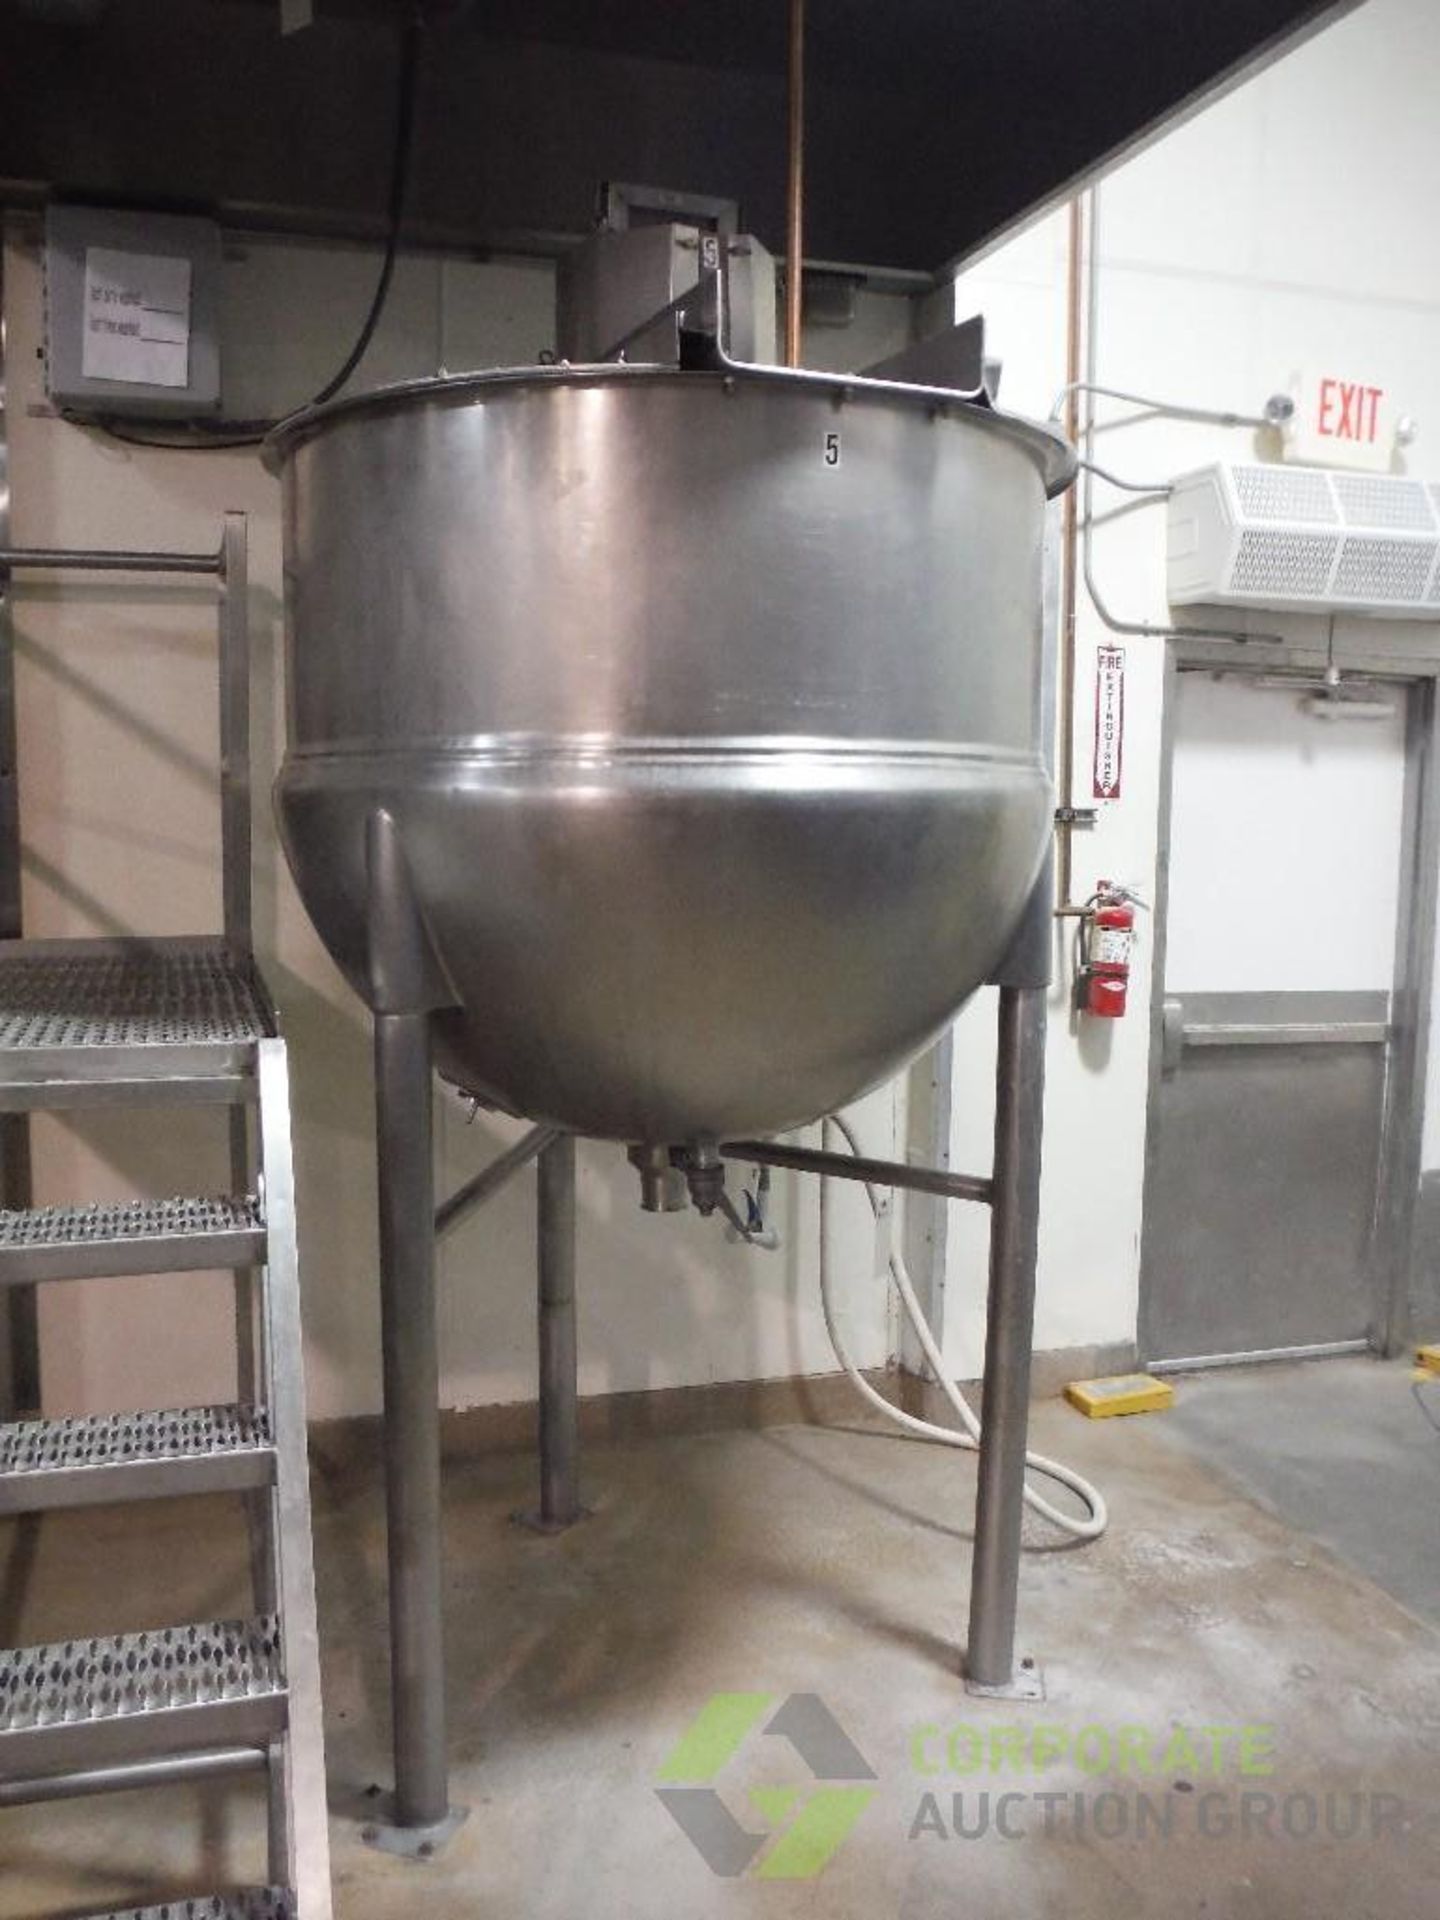 1997 Lee SS 350 gallon kettle, Model 350D9MS, SN C4821A, 1/2 jacket, 90 psi @ 332 F, top